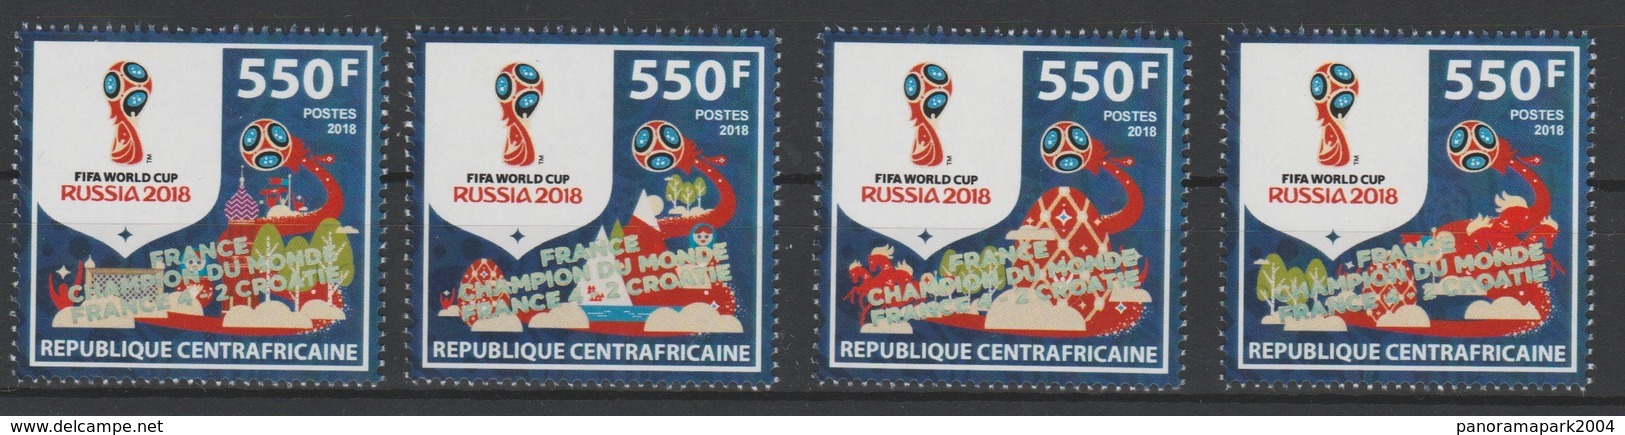 Centrafrique 2018 Surch. Ovpt. "FRANCE CHAMPION" FIFA World Cup WM Coupe Du Monde Russie Russia Football Fußball Soccer - Central African Republic